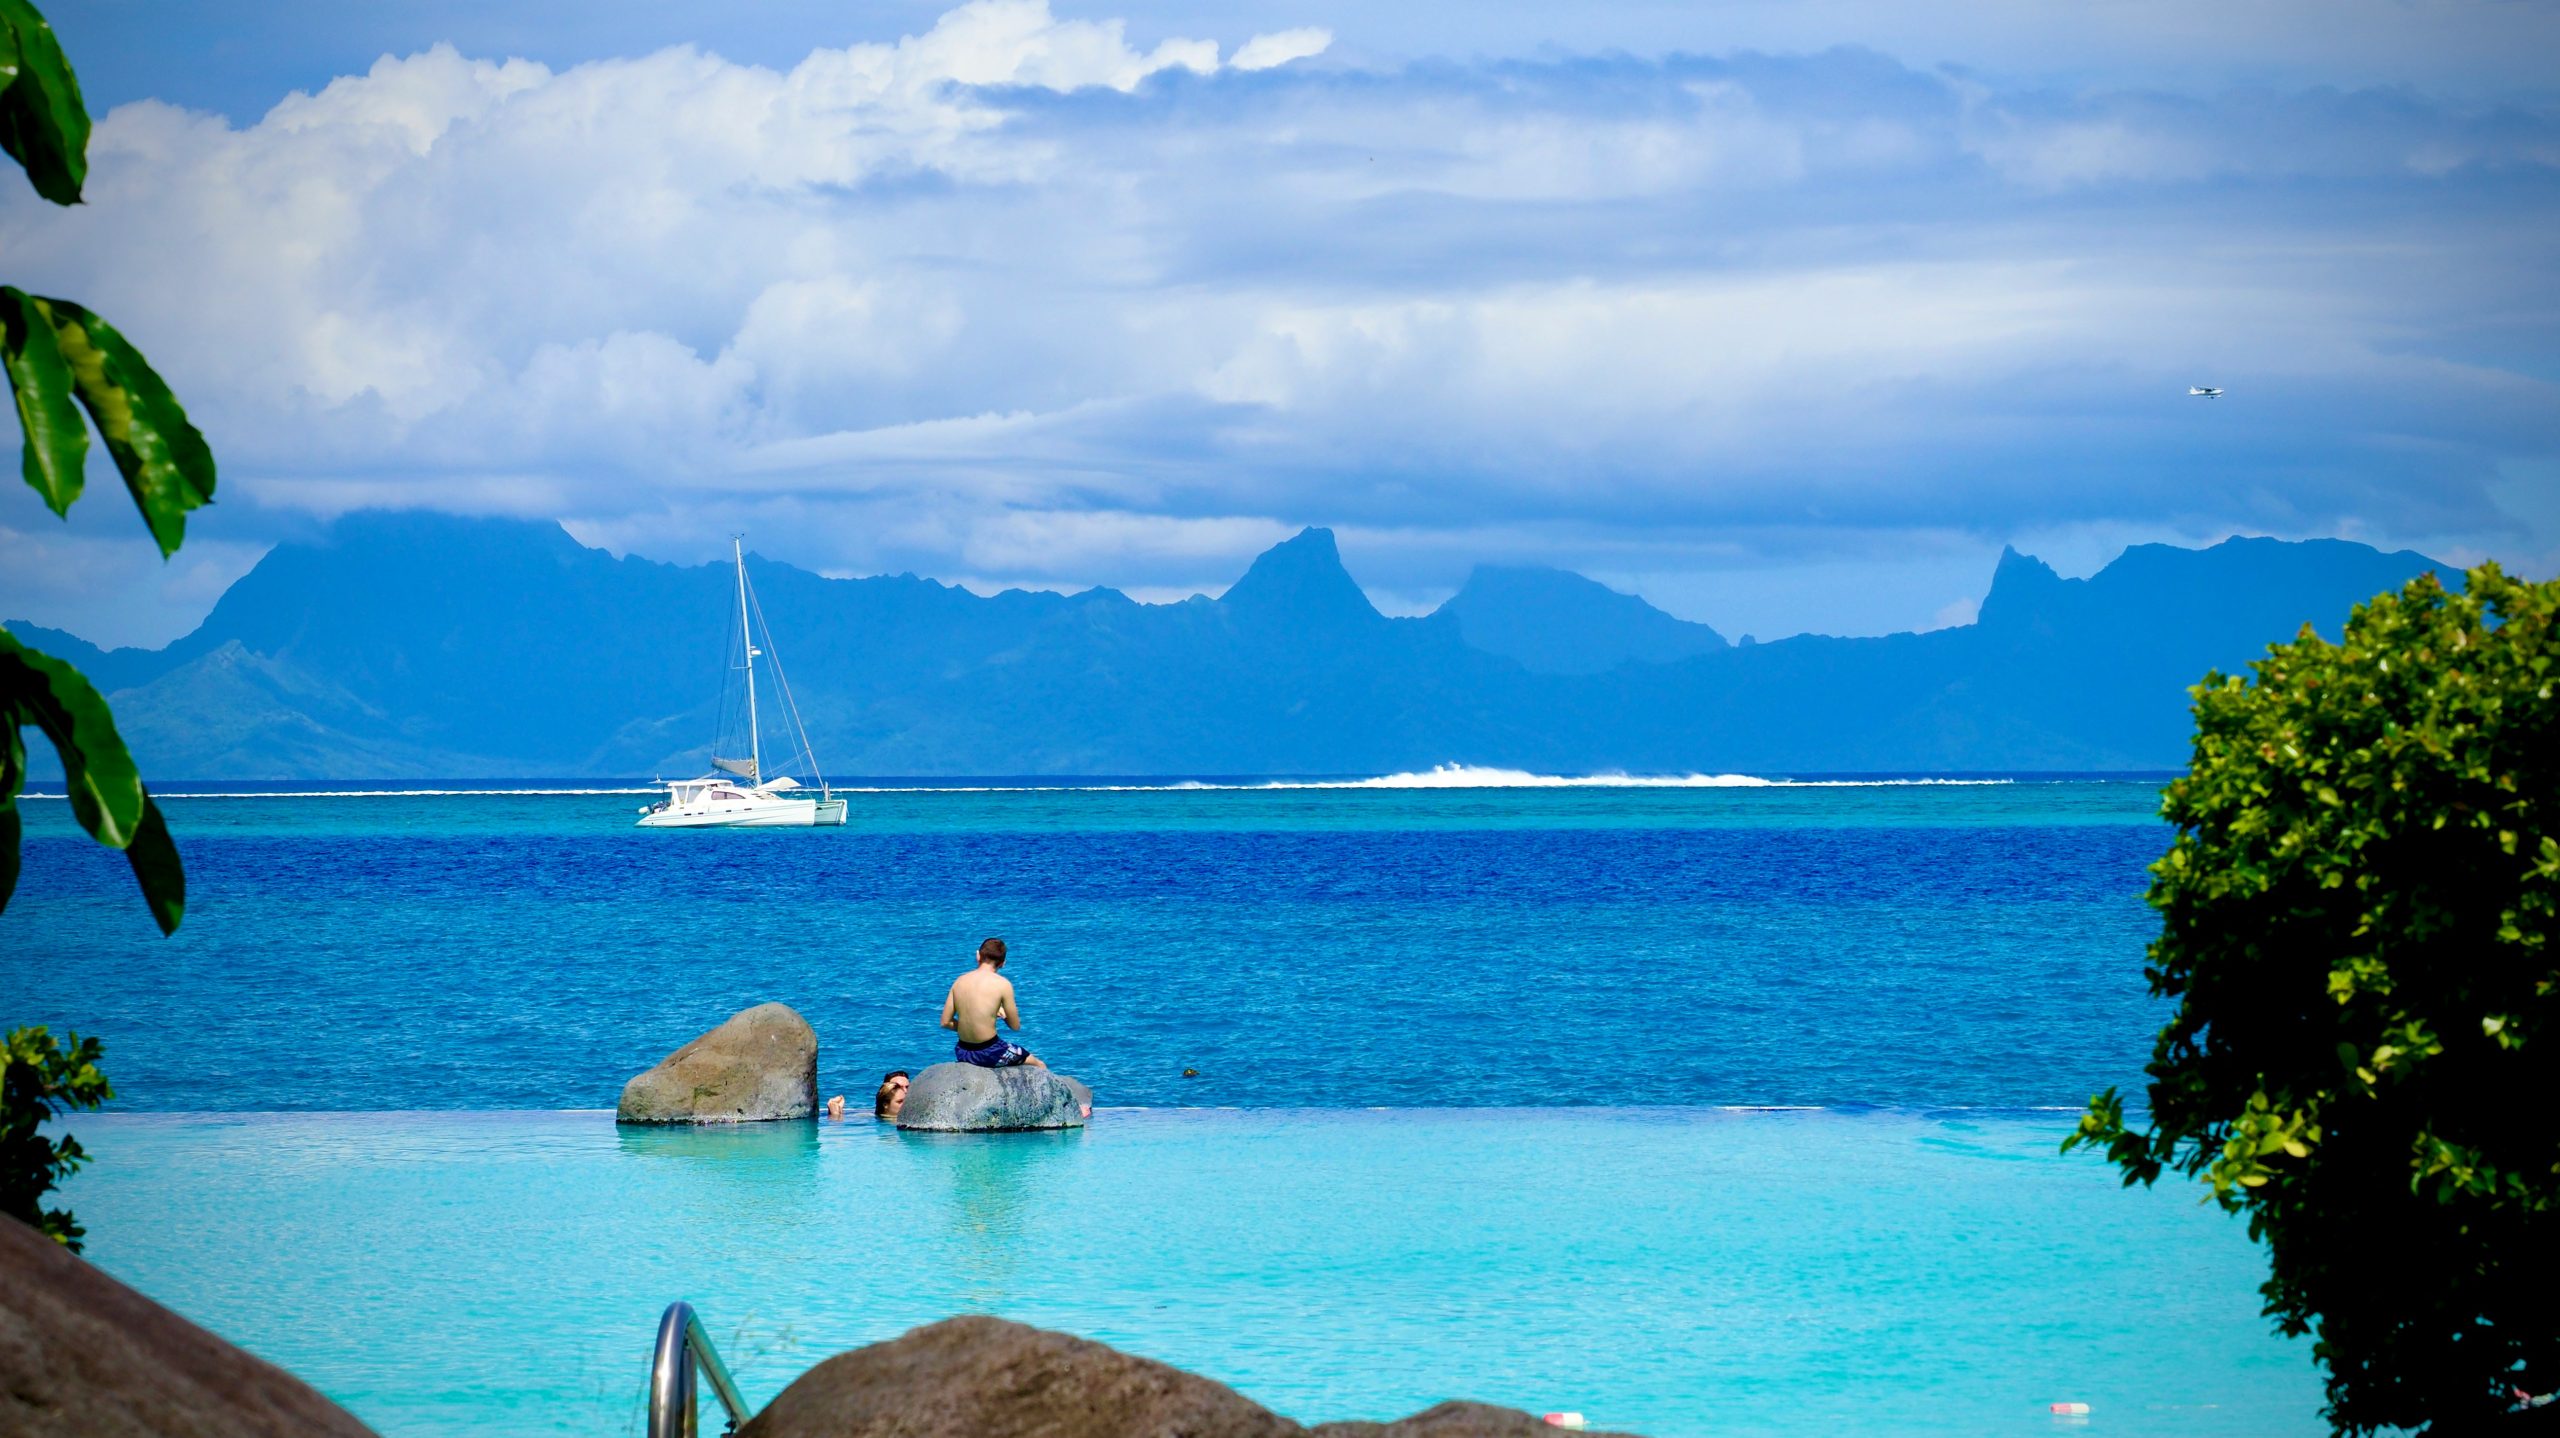 discover tahiti and its natural beauty with a dream vacation. plan your trip to tahiti with our travel guide and explore the stunning beaches, lush landscapes, and rich polynesian culture.